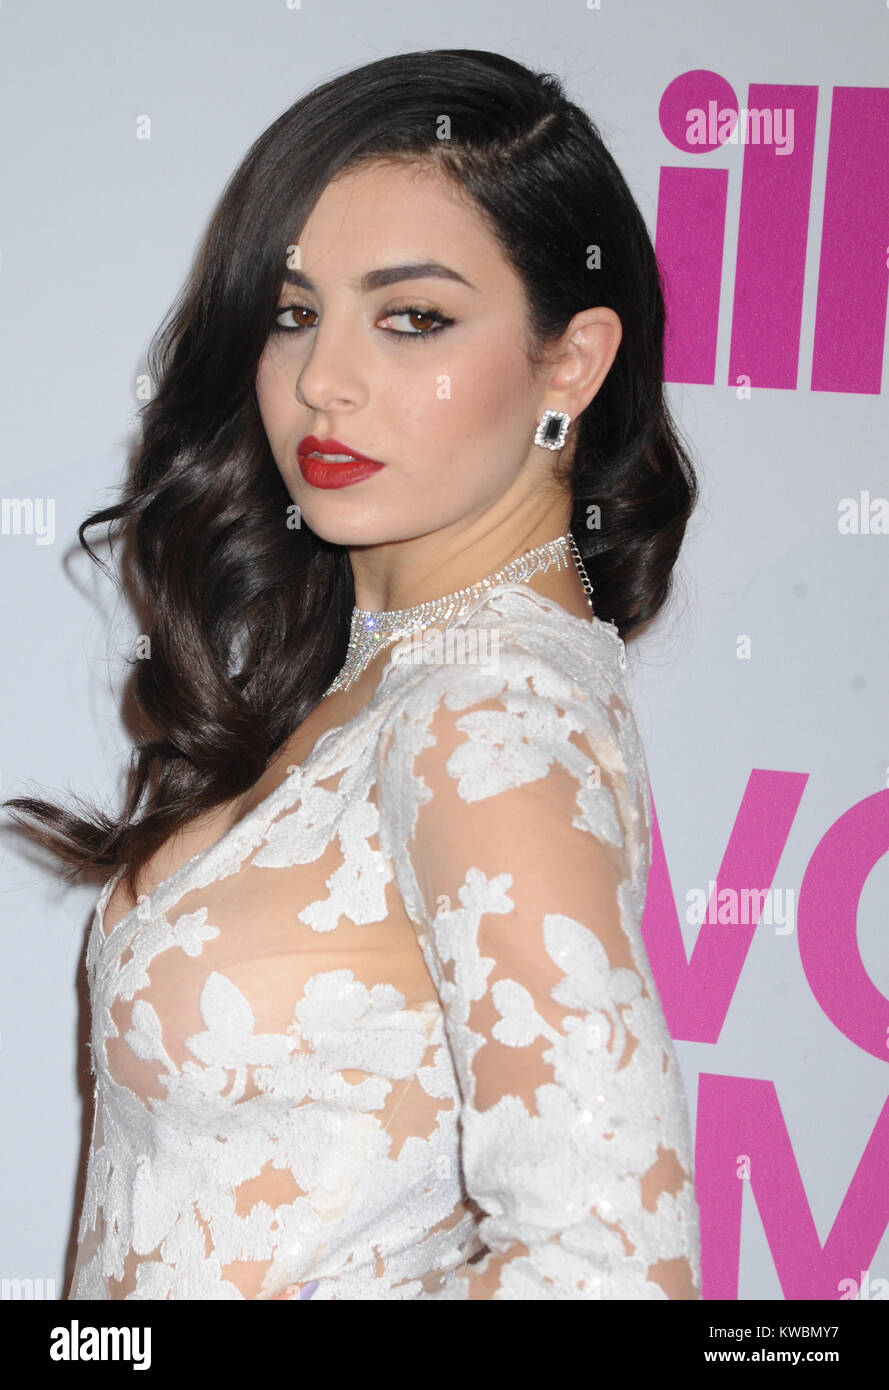 YORK, NY - DECEMBER 12: Charli XCX attends the 2014 Billboard Women In Music Luncheon at Cipriani Wall Street on December 12, in New York City. People: Charli XCX Stock - Alamy